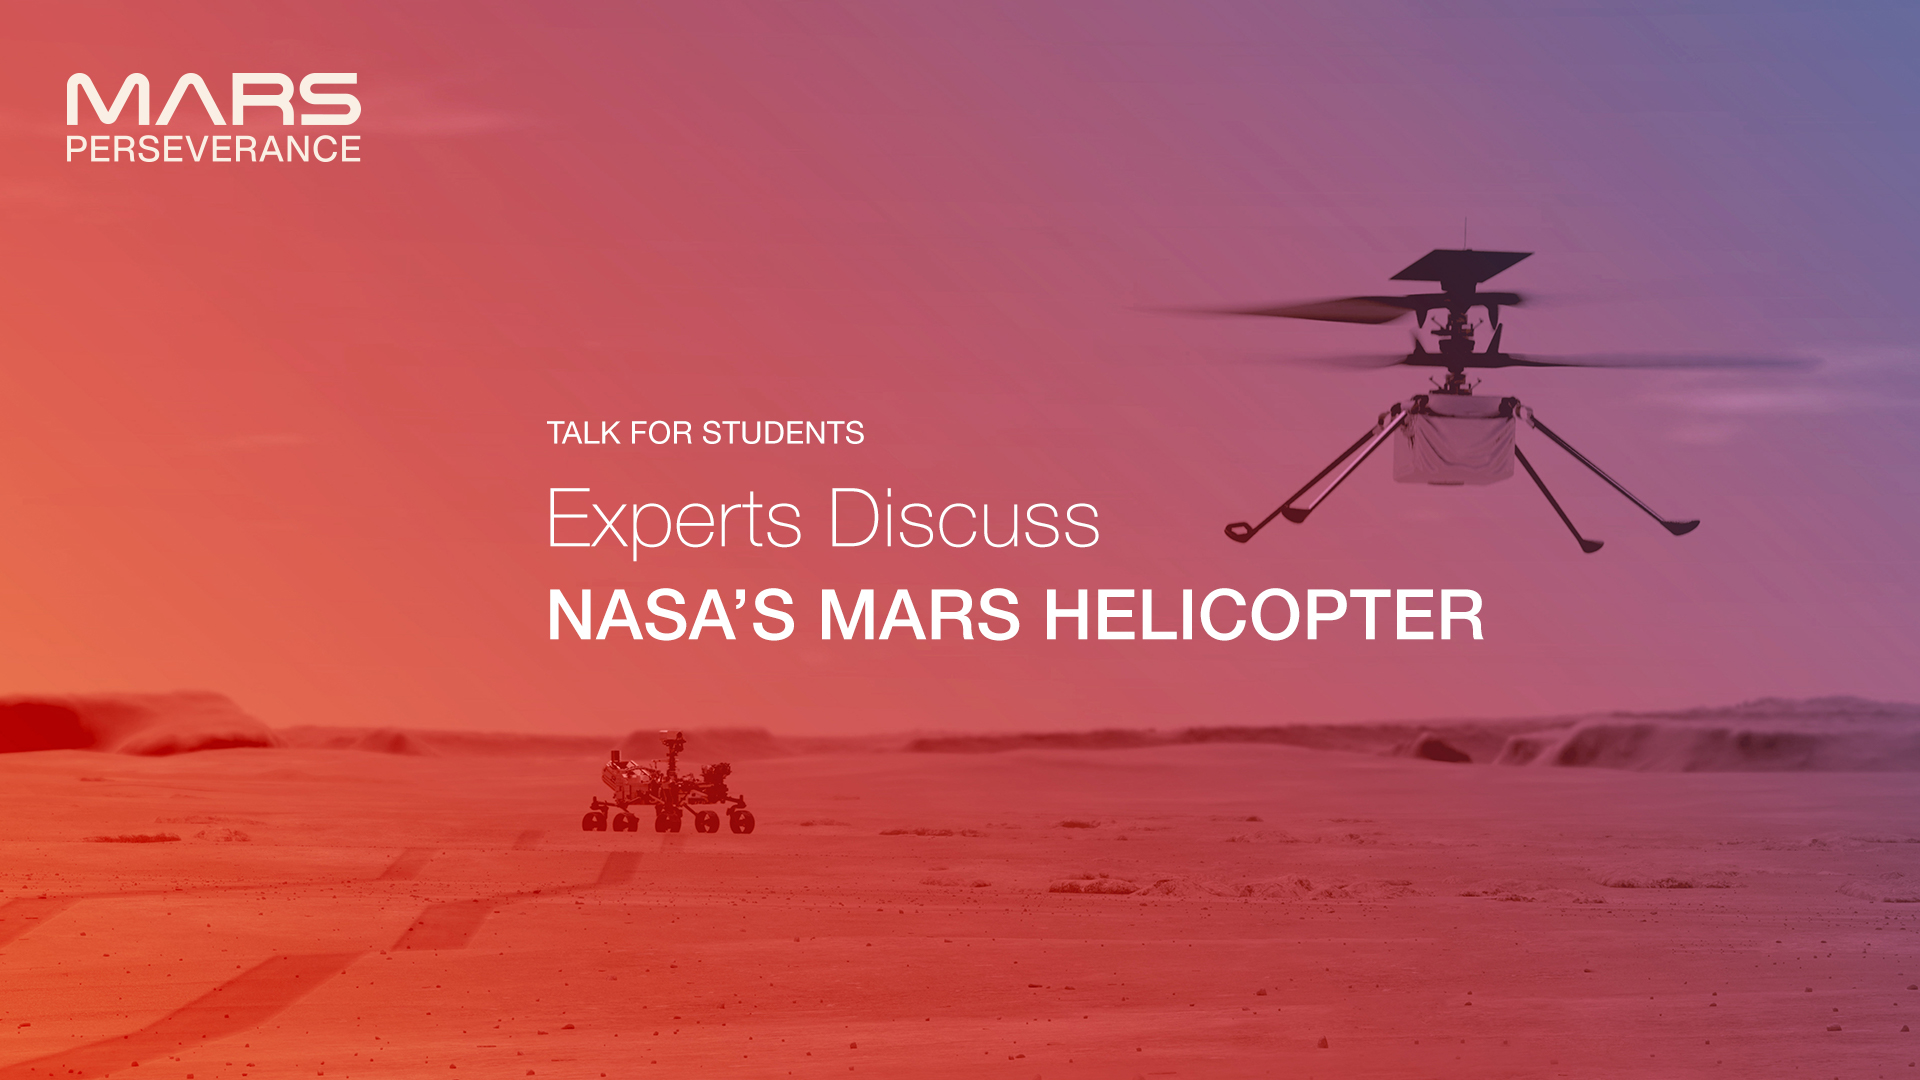 Learning Space With NASA: Experts Discuss NASA's Mars Helicopter